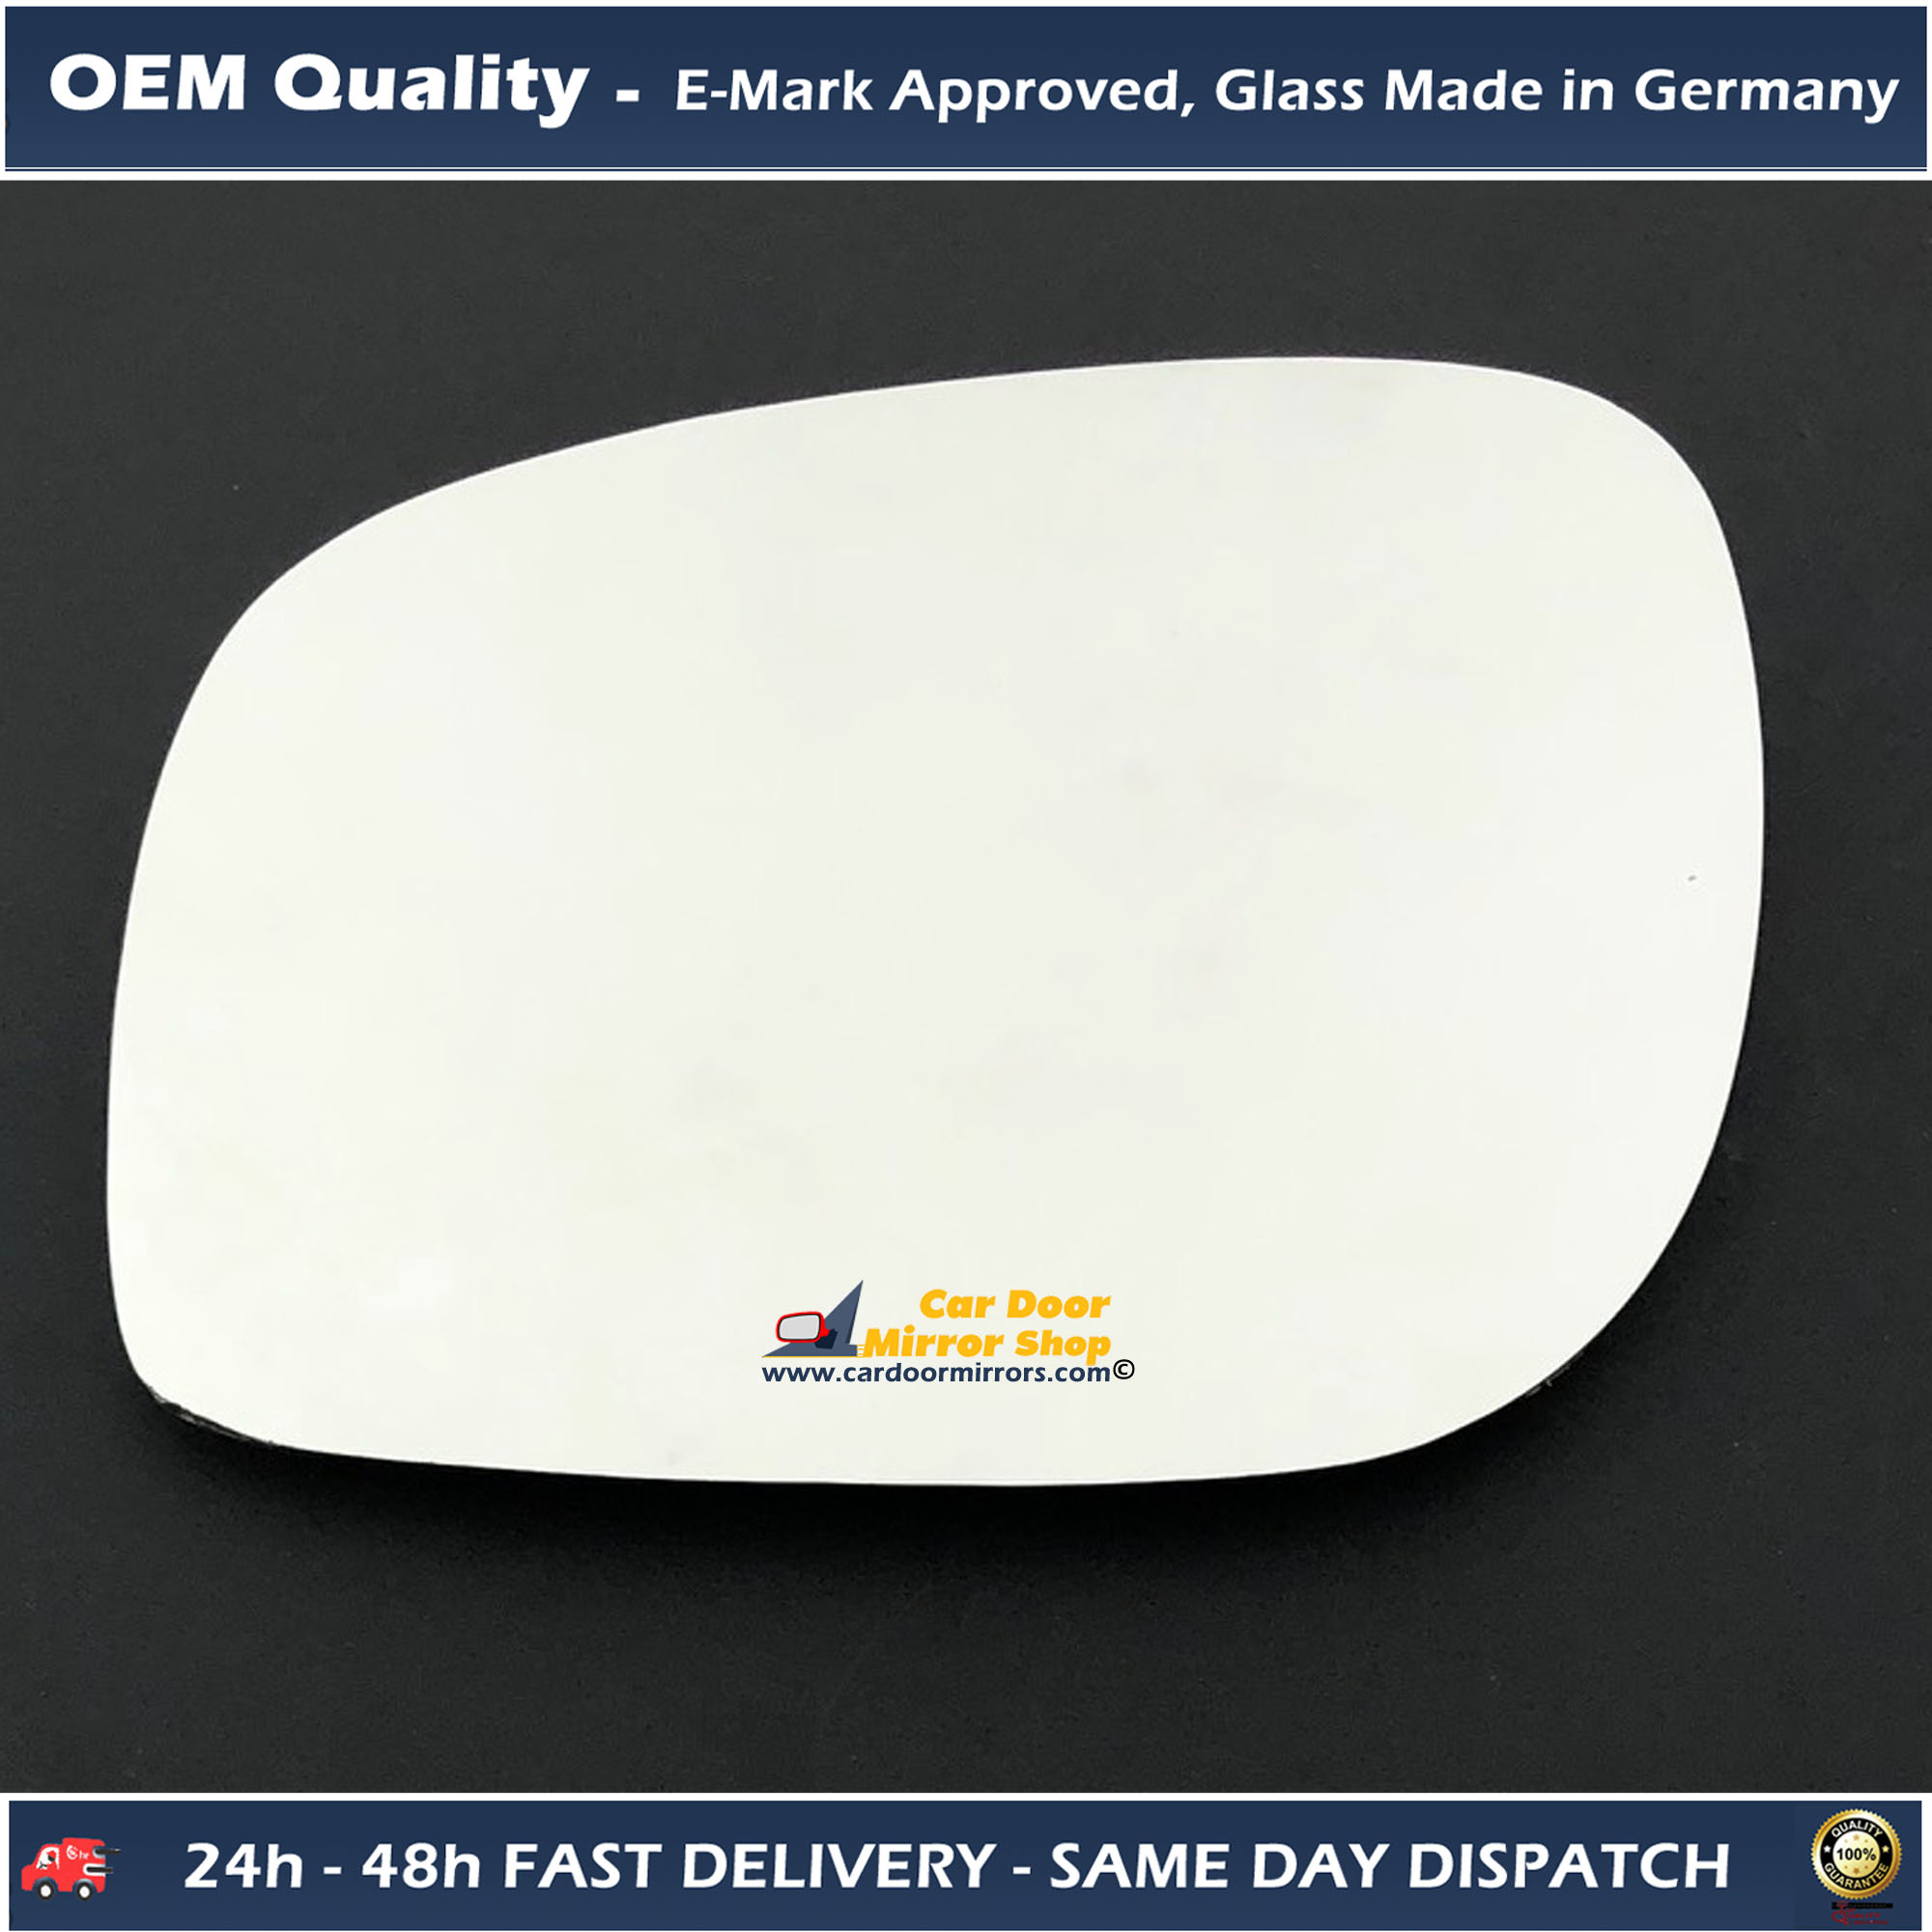 Land Rover Freelander Wing Mirror Glass LEFT HAND ( UK Passenger Side ) 1998 to 2000 – Convex Wing Mirror